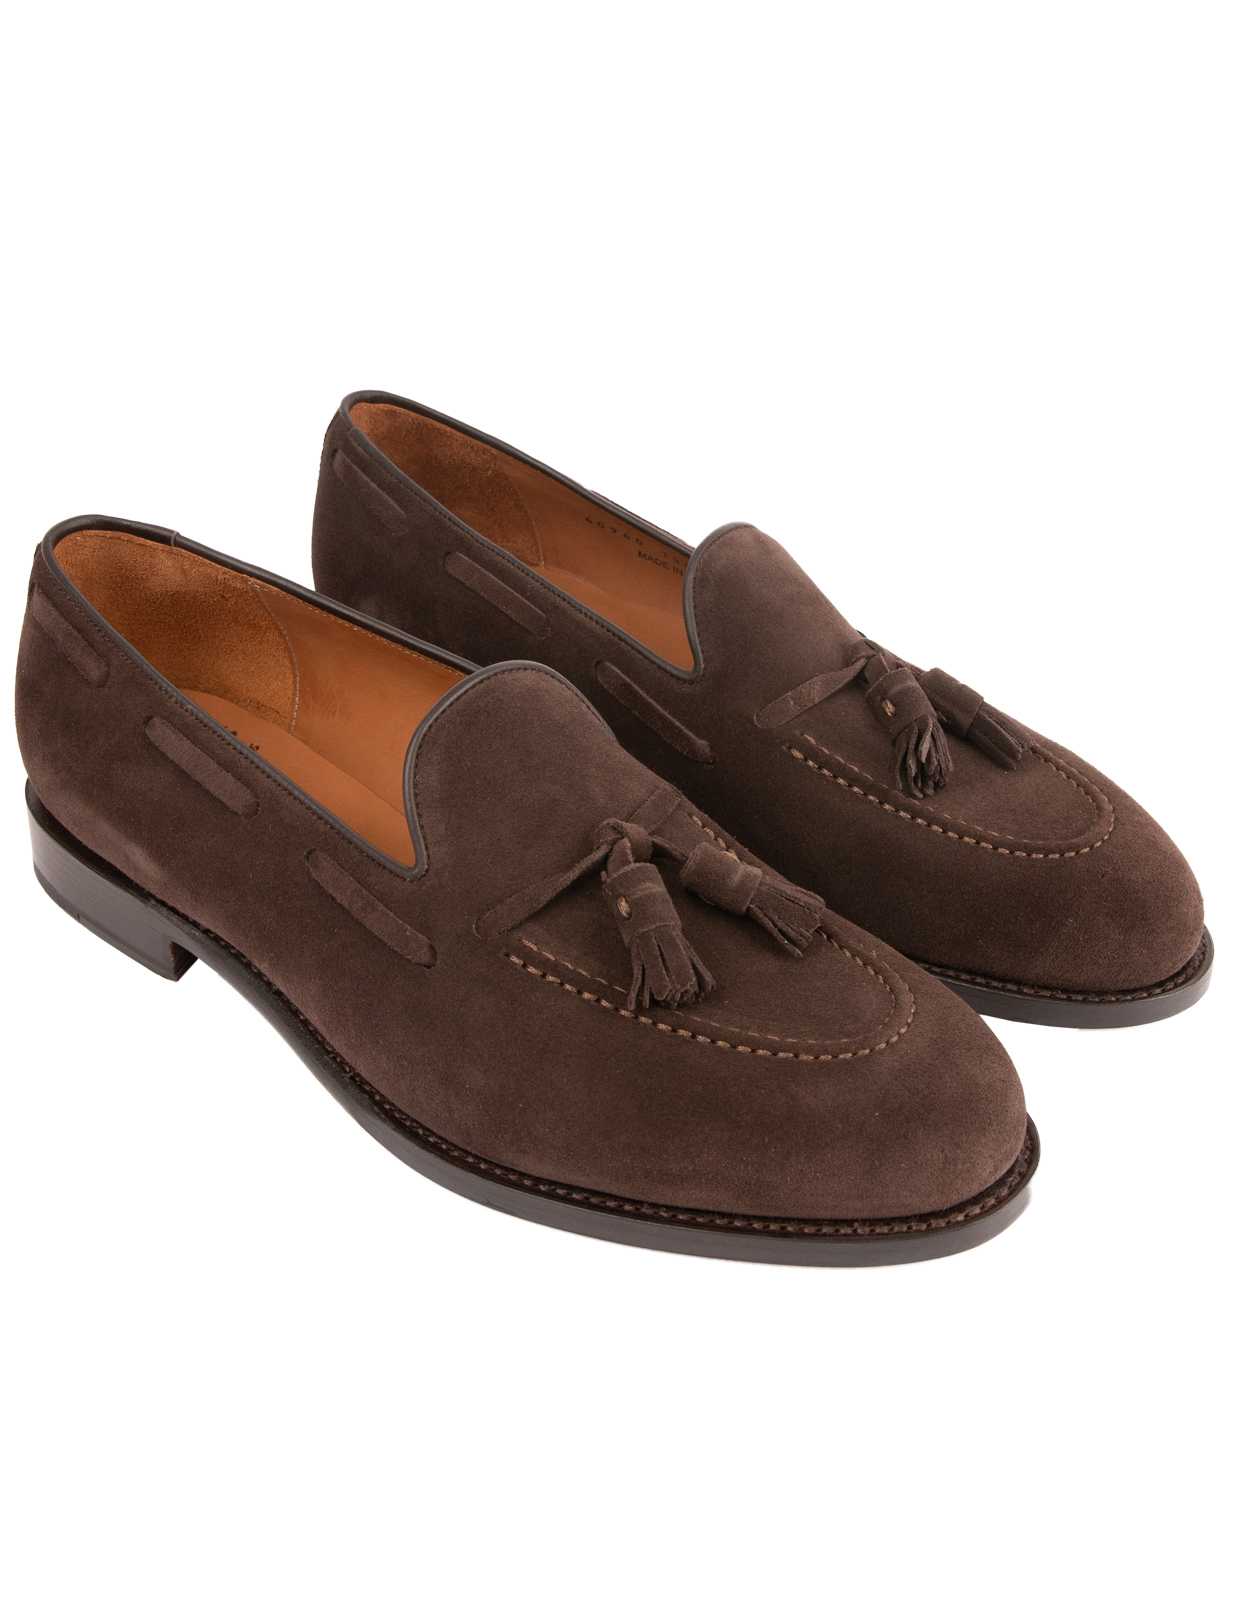 Tassel Loafers Suede Bitter Chocolate Stl 11